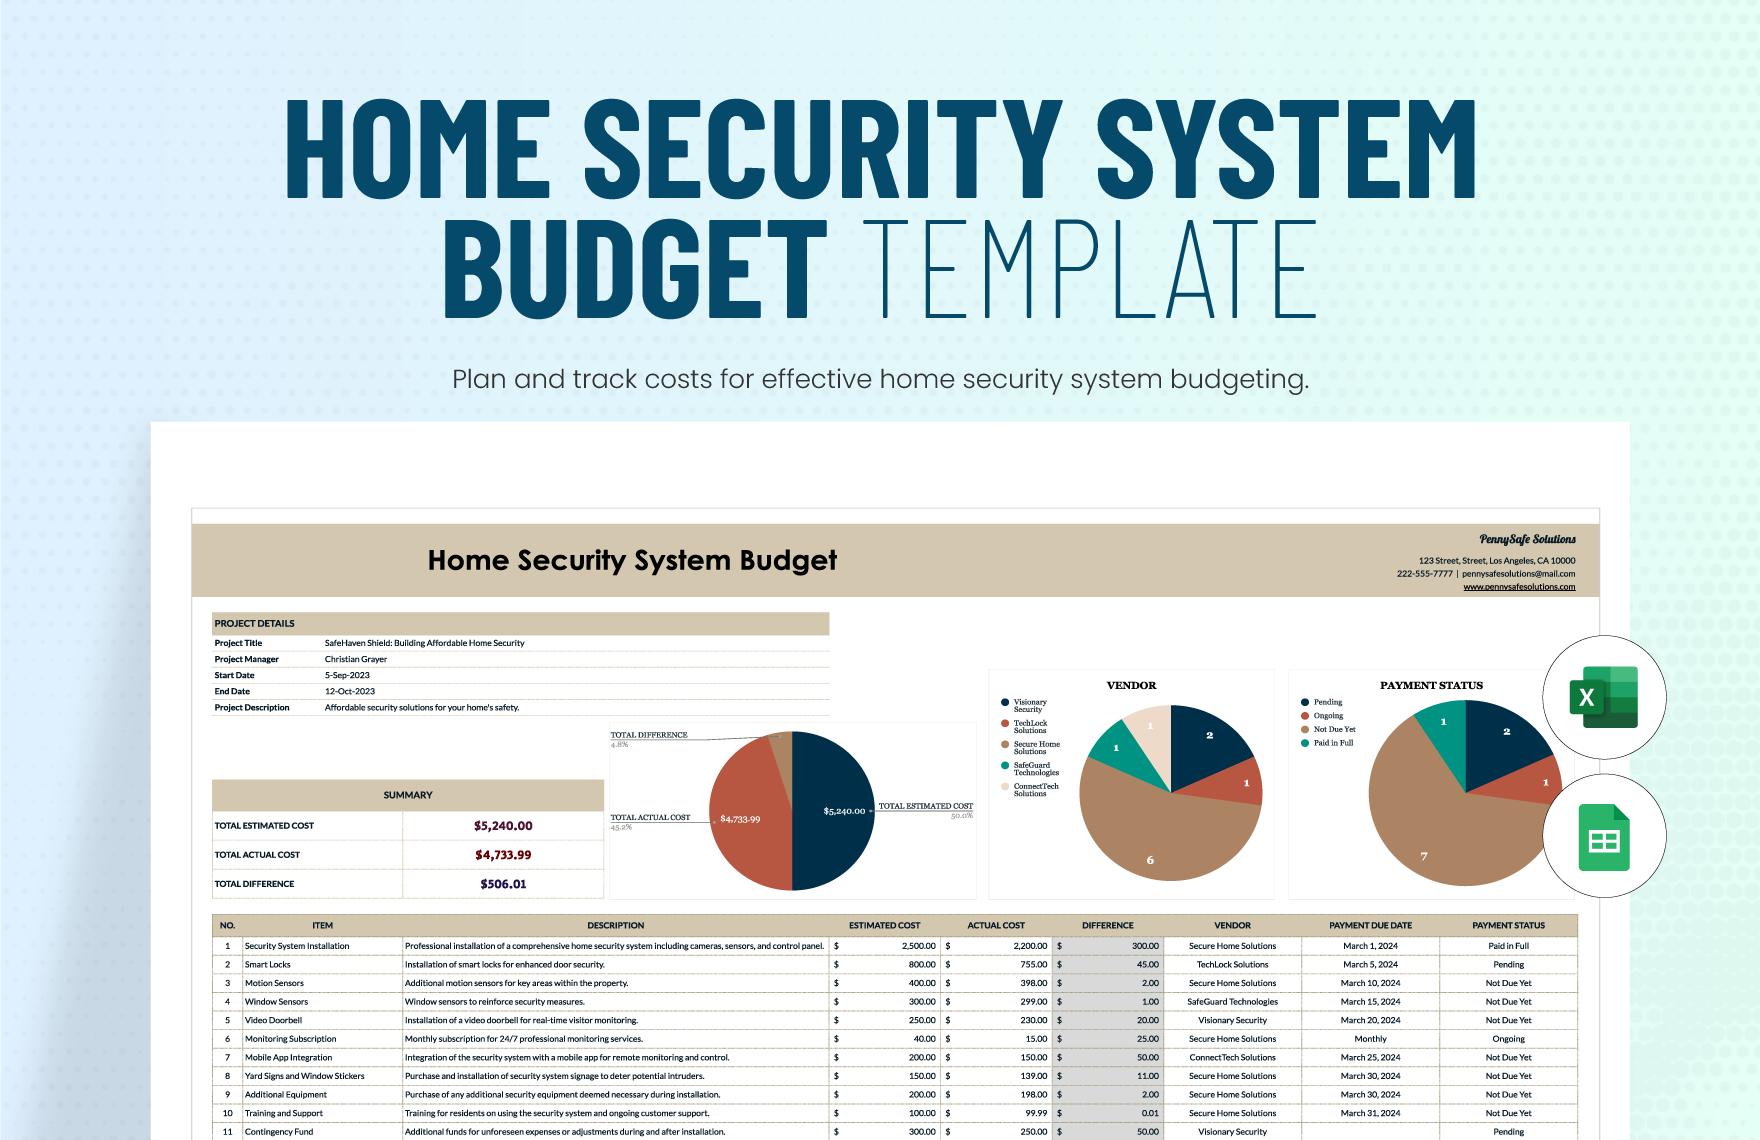 Home Security System Budget Template